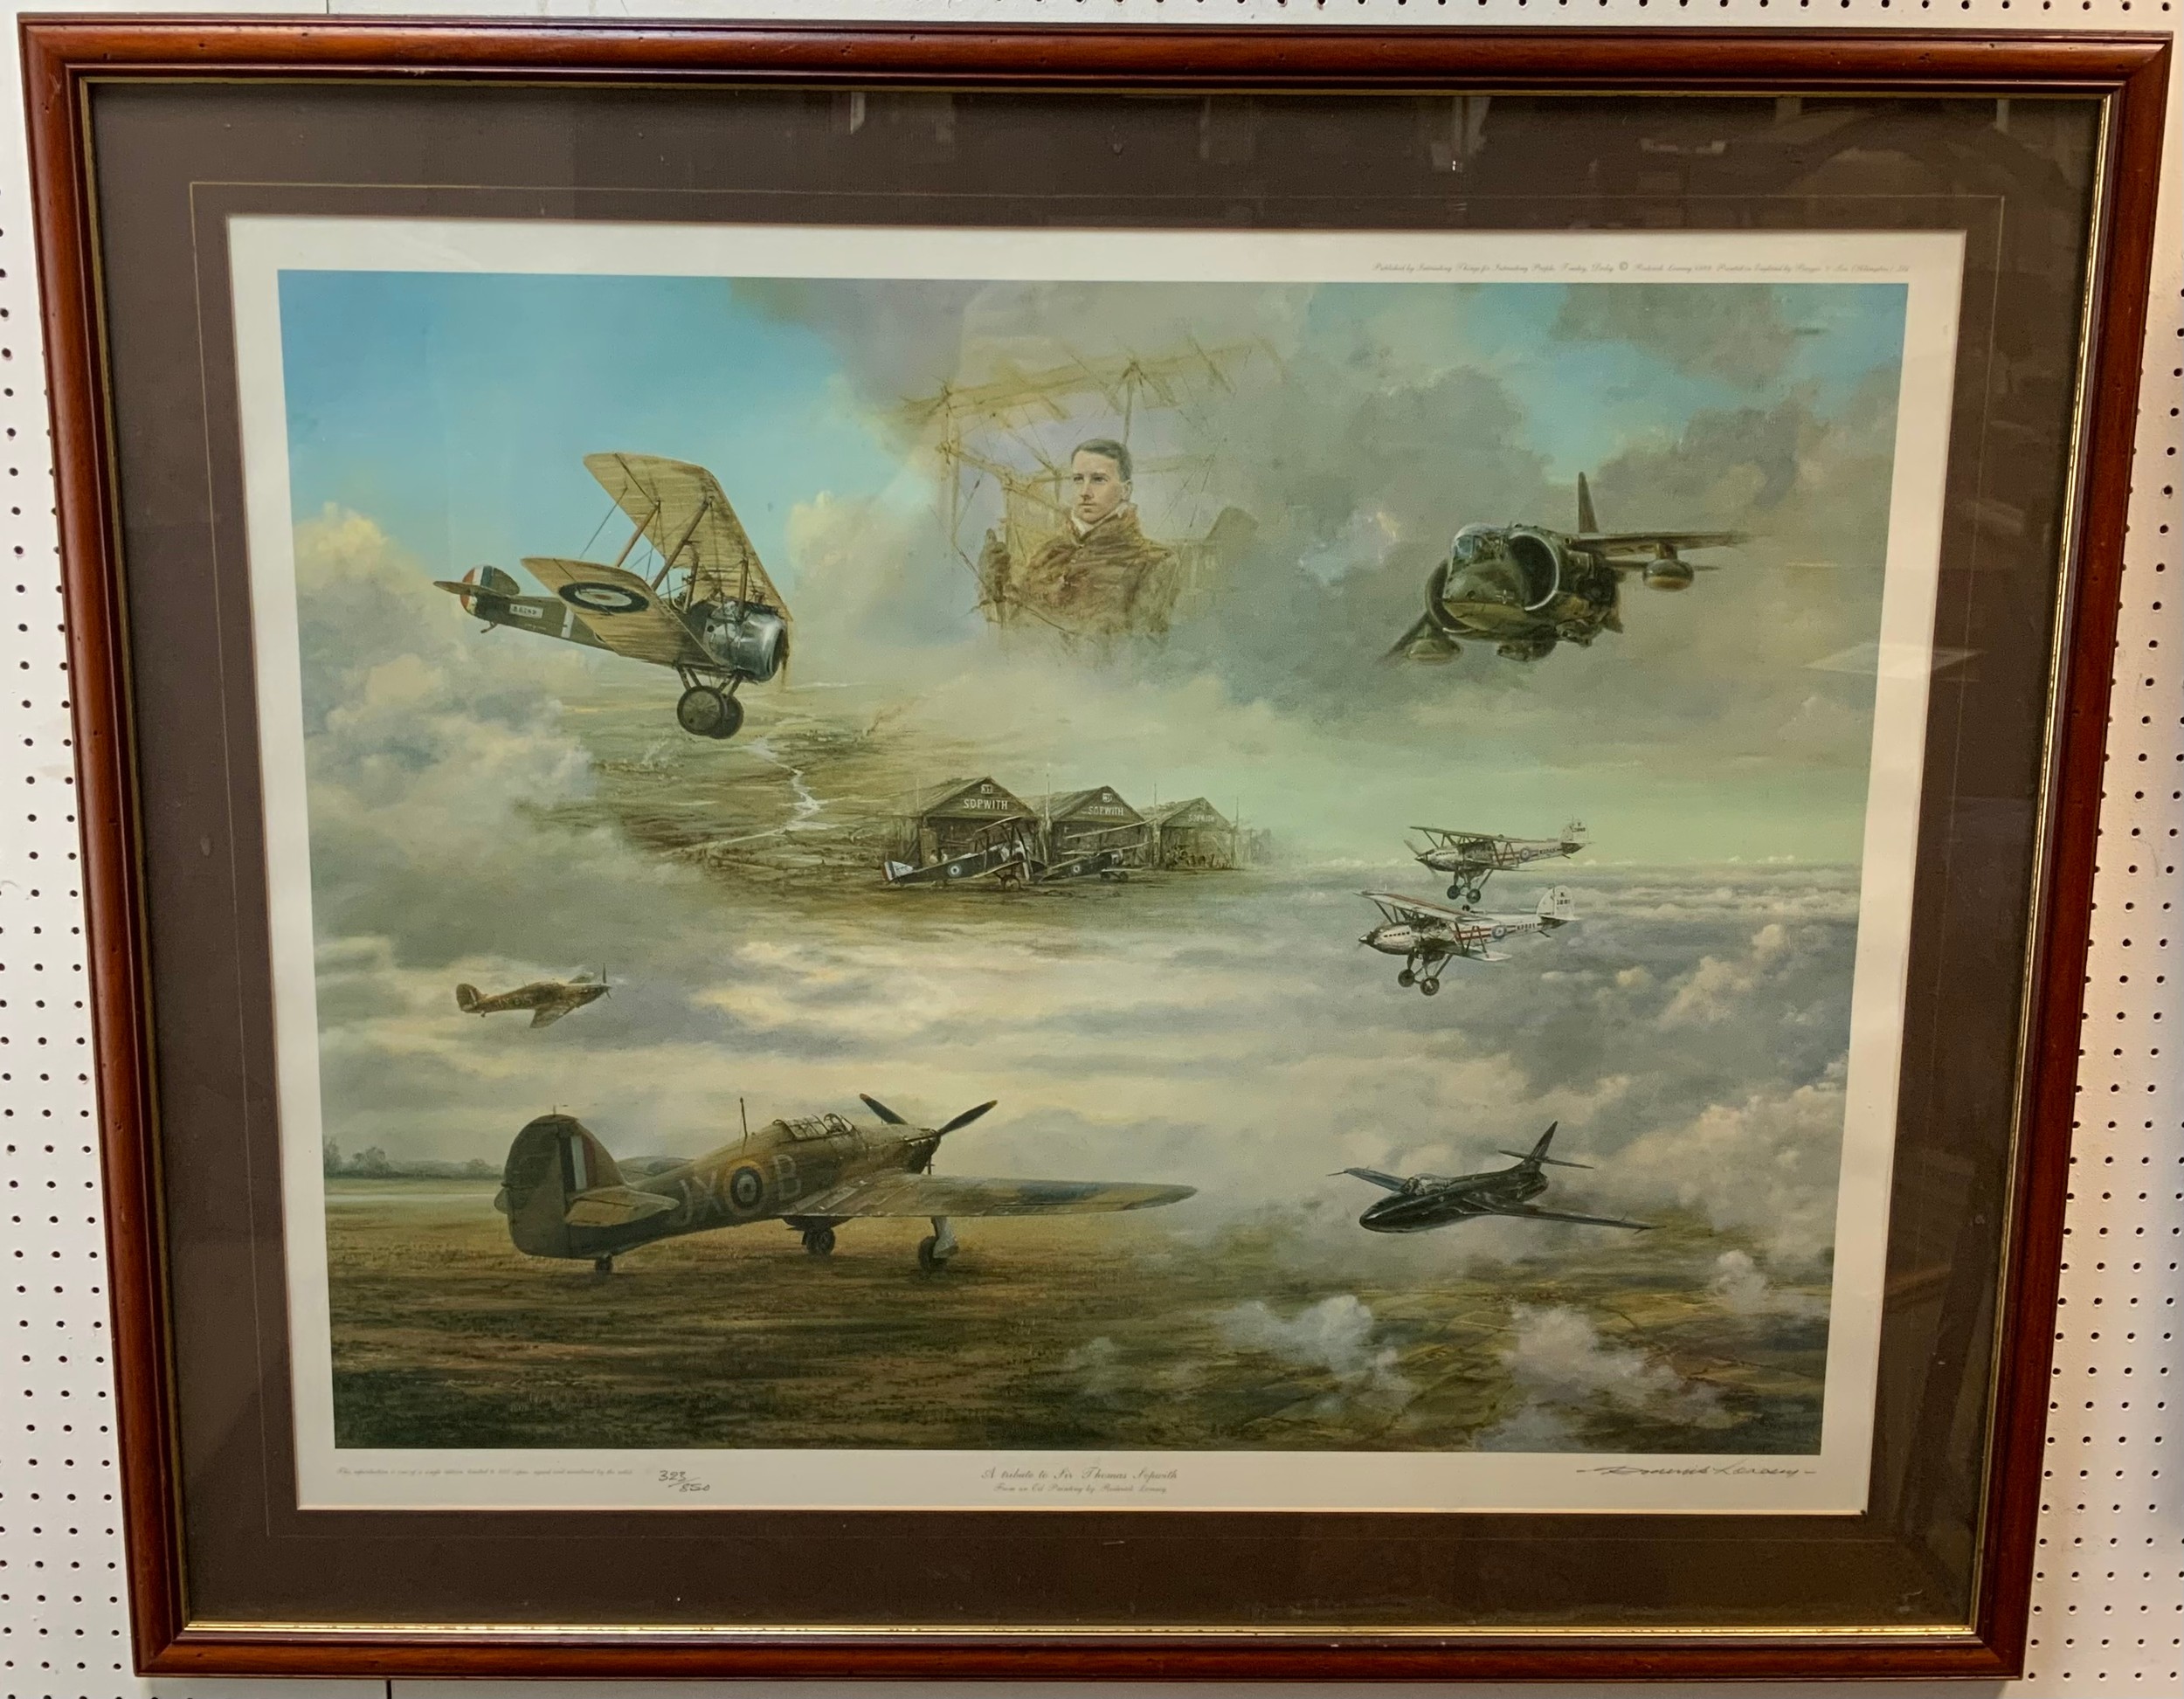 Roderick Lovesey, by and after, 'A Tribute to Sir Thomas Sopwith' limited edition print, 323/850,